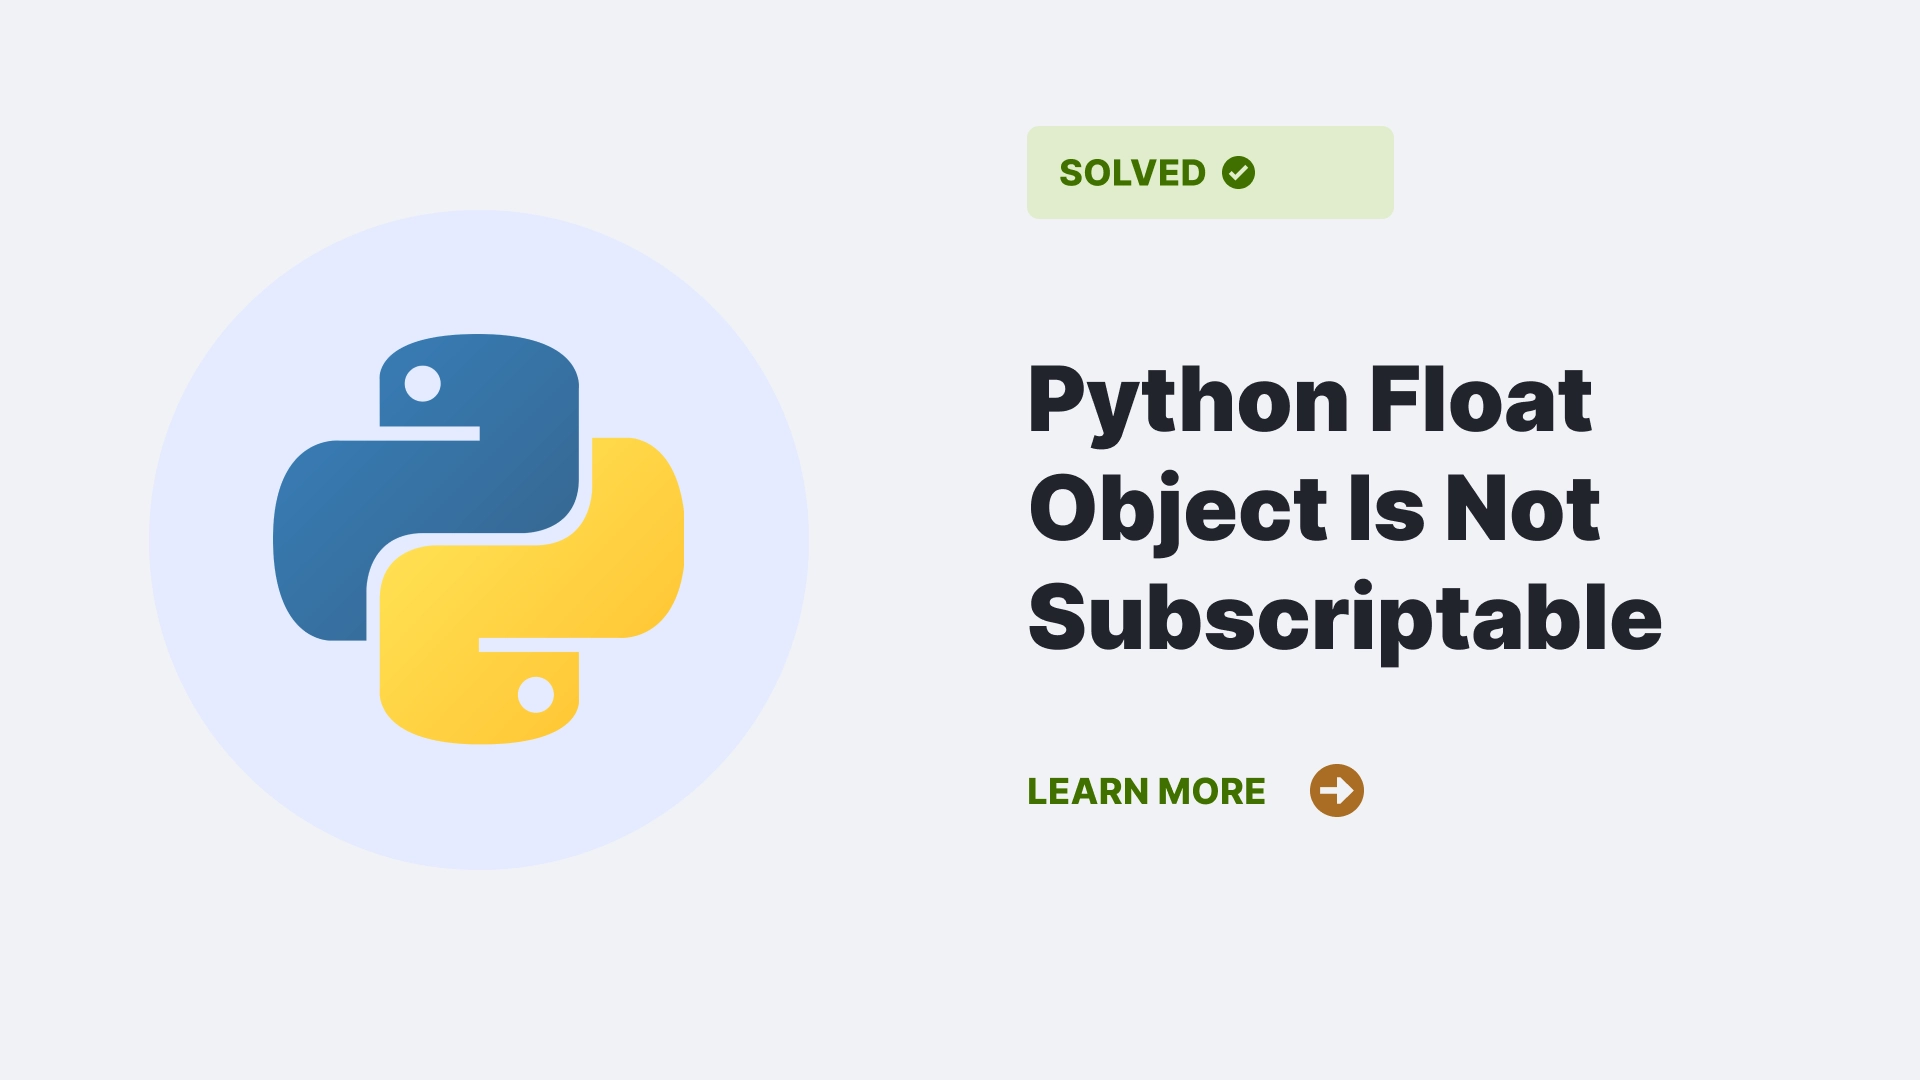 Python Float Object Is Not Subscriptable Error